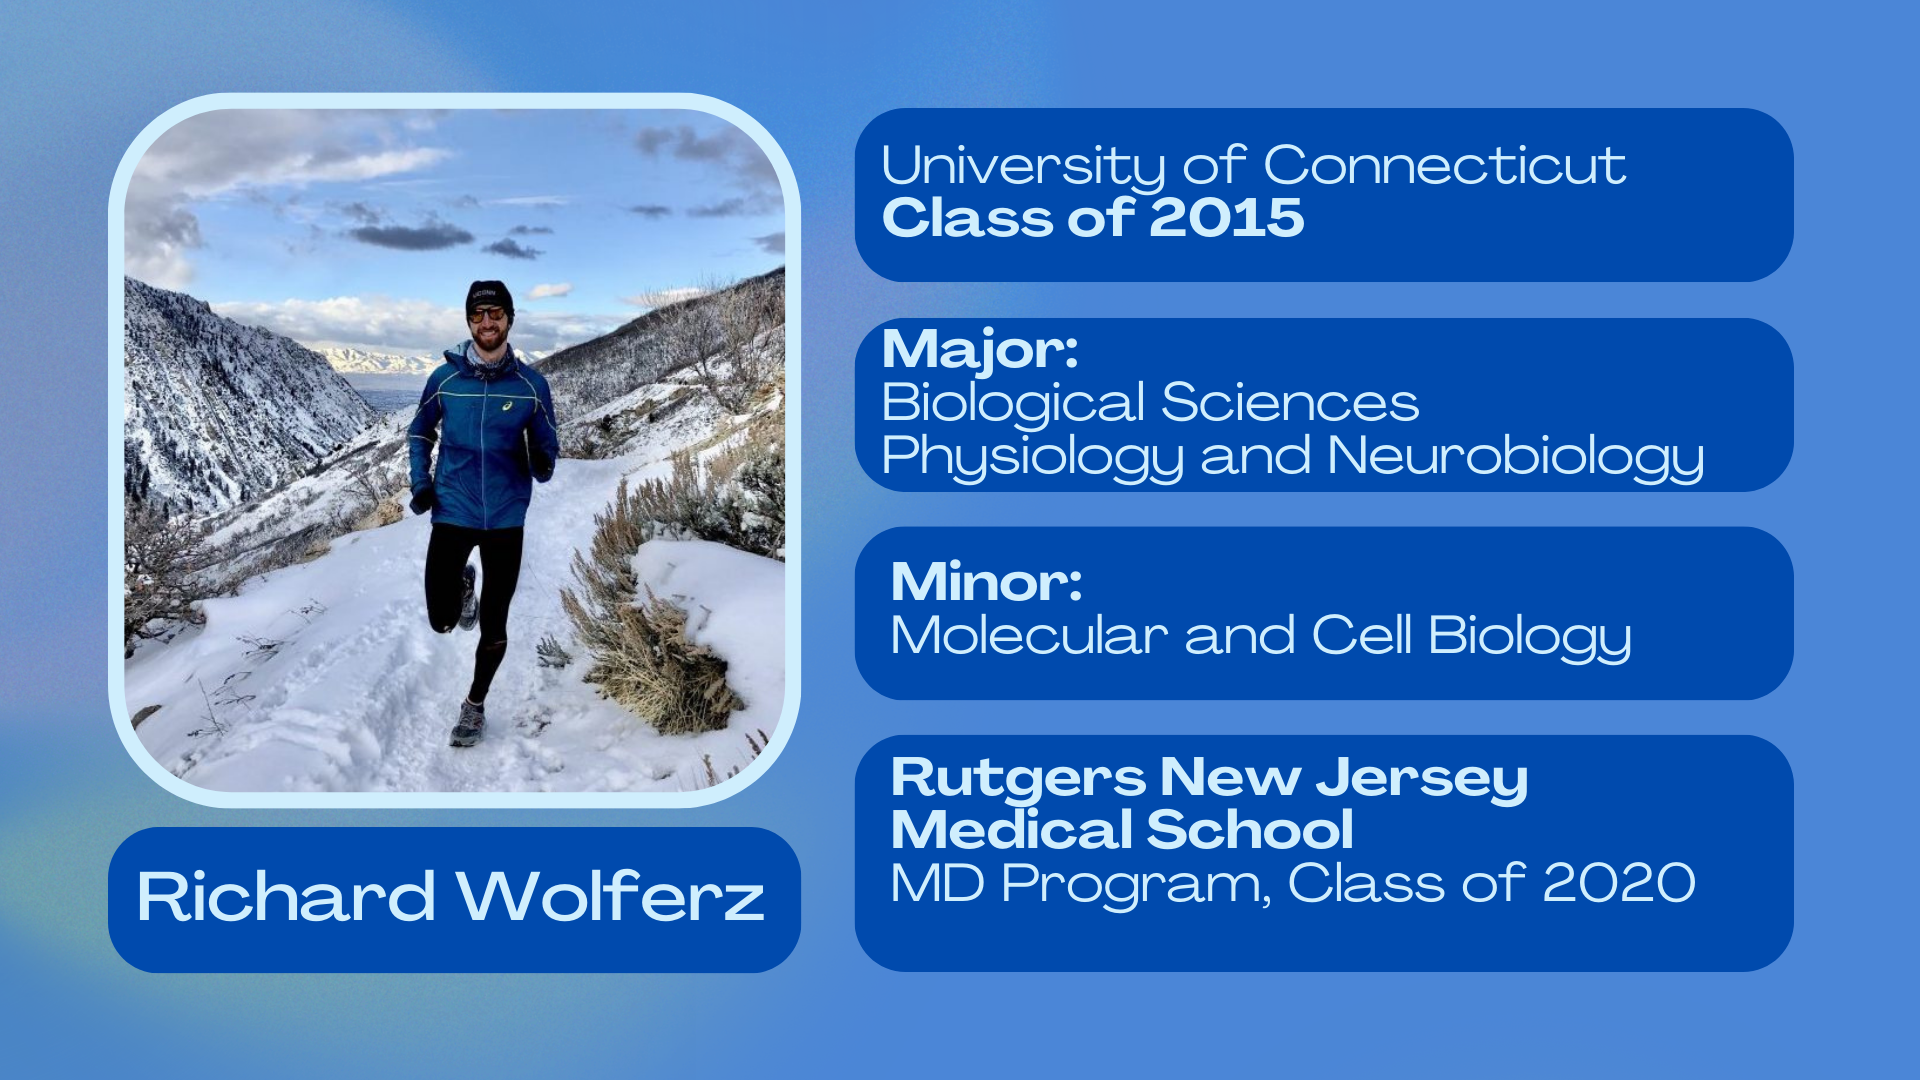 Richard Wolferz; University of Connecticut class of 2015; Major: Biological Sciences, Physiology and Neurobiology; minor: Molecular and Cell Biology; Rutgers New Jersey Medical SChool MD Program class of 2020